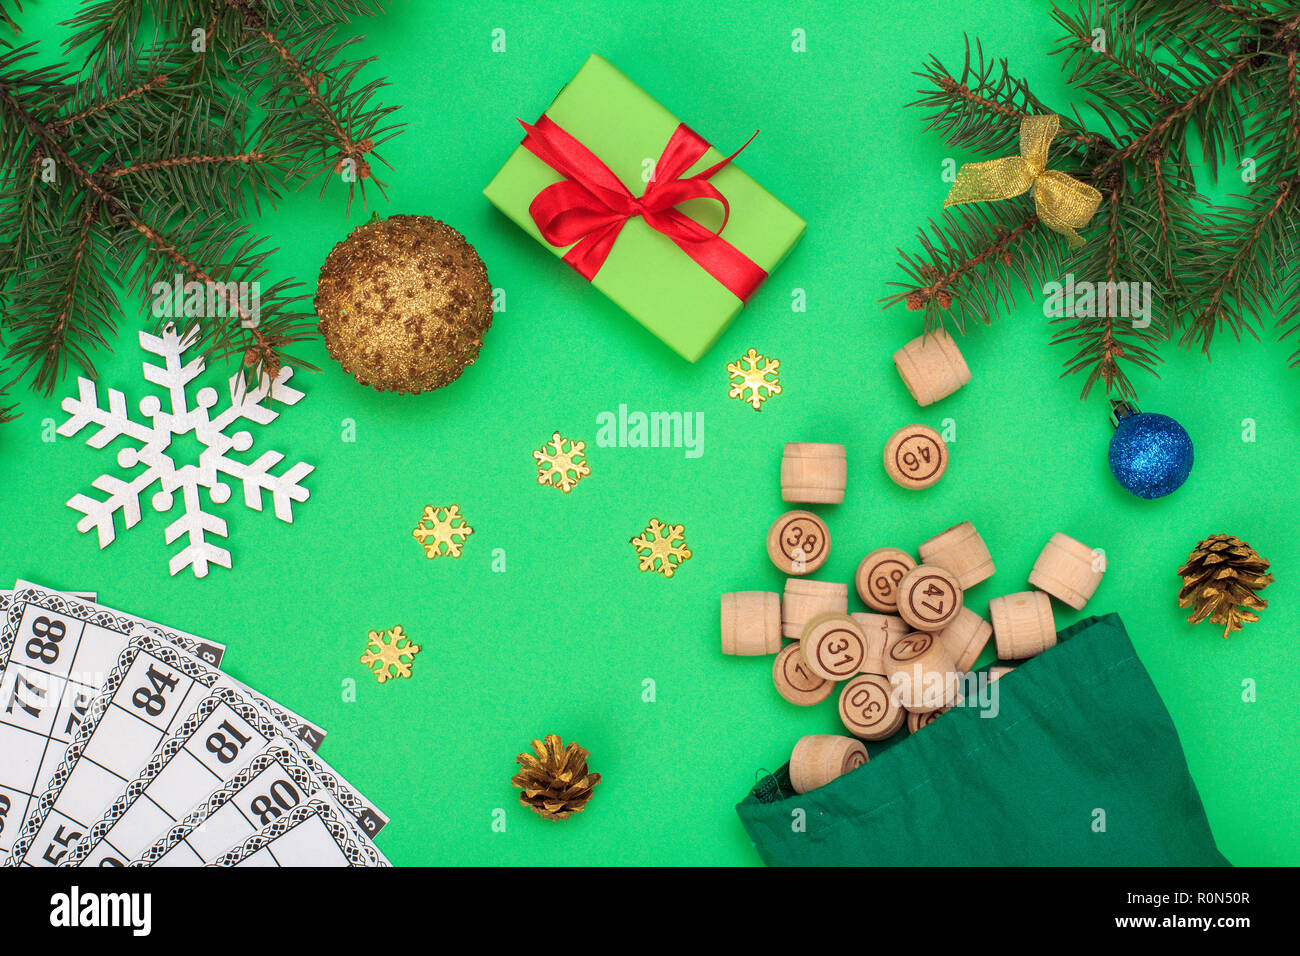 Board game lotto. Wooden lotto barrels with bag and game cards for a game in lotto, Christmas fir tree branches, cones, toy balls, snowflackes and gif Stock Photo